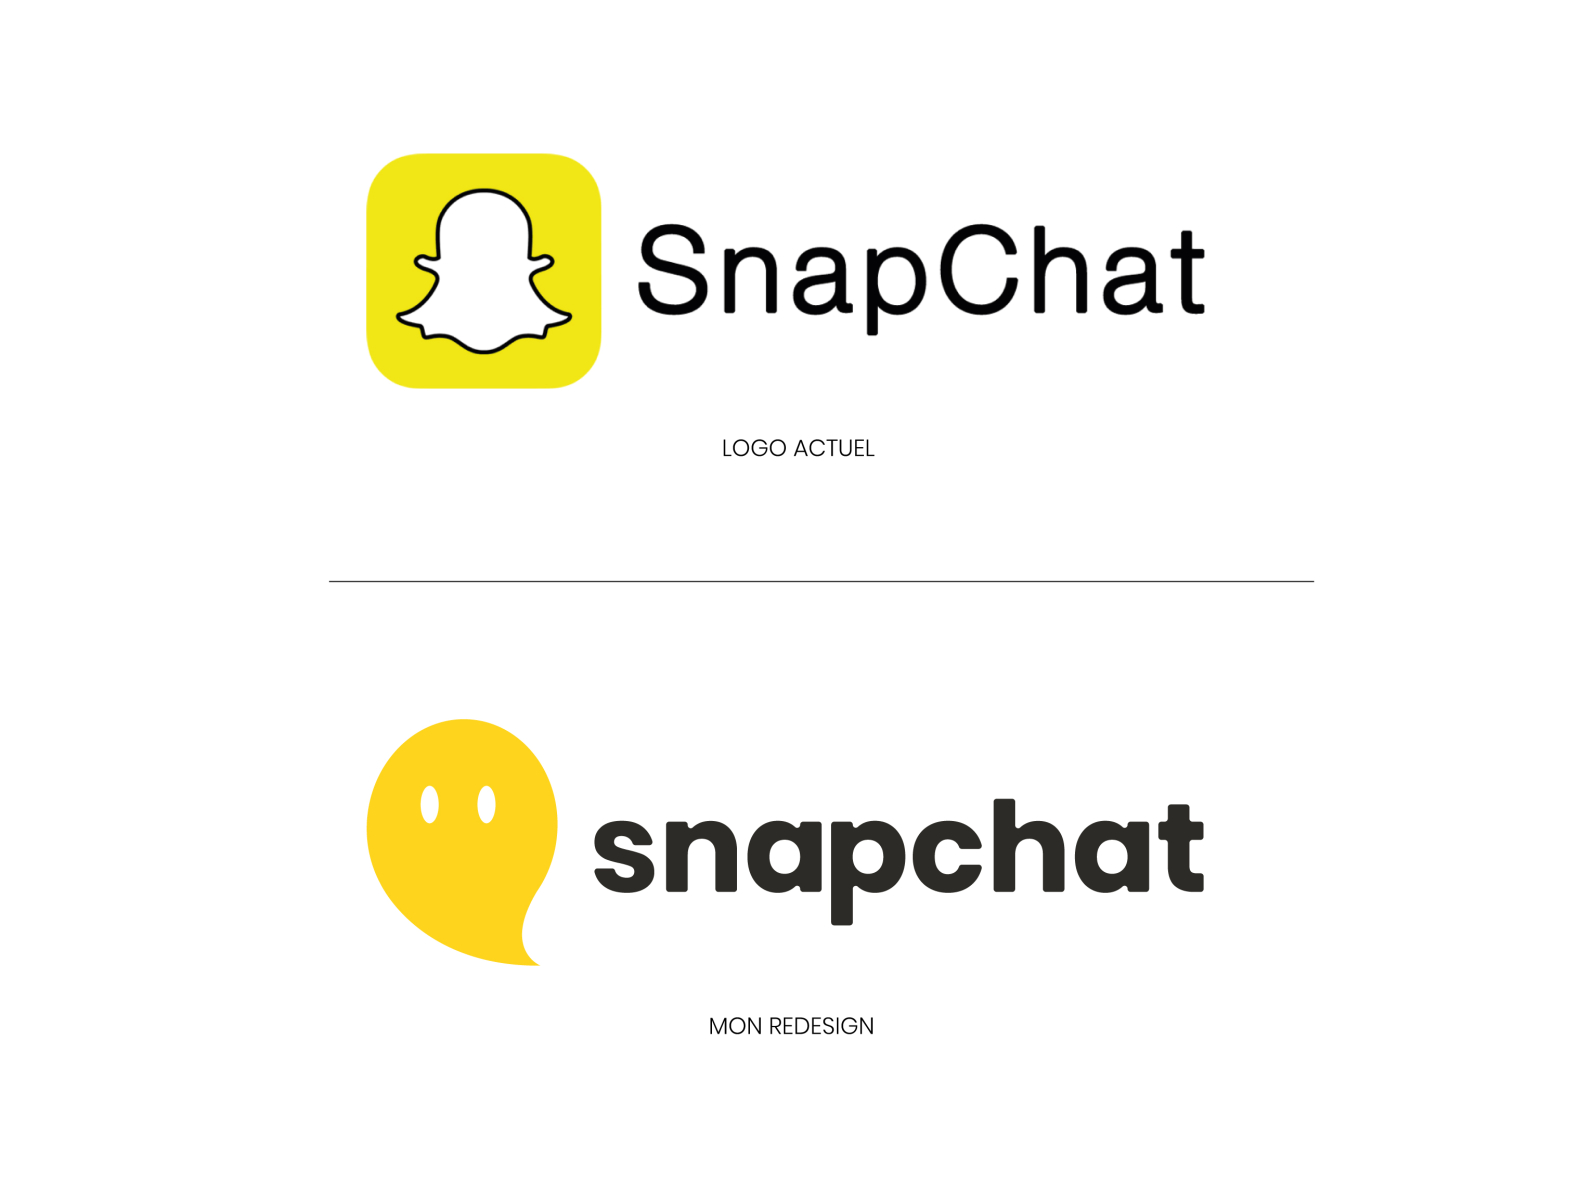 Logo redesign snapchat by royer on Dribbble